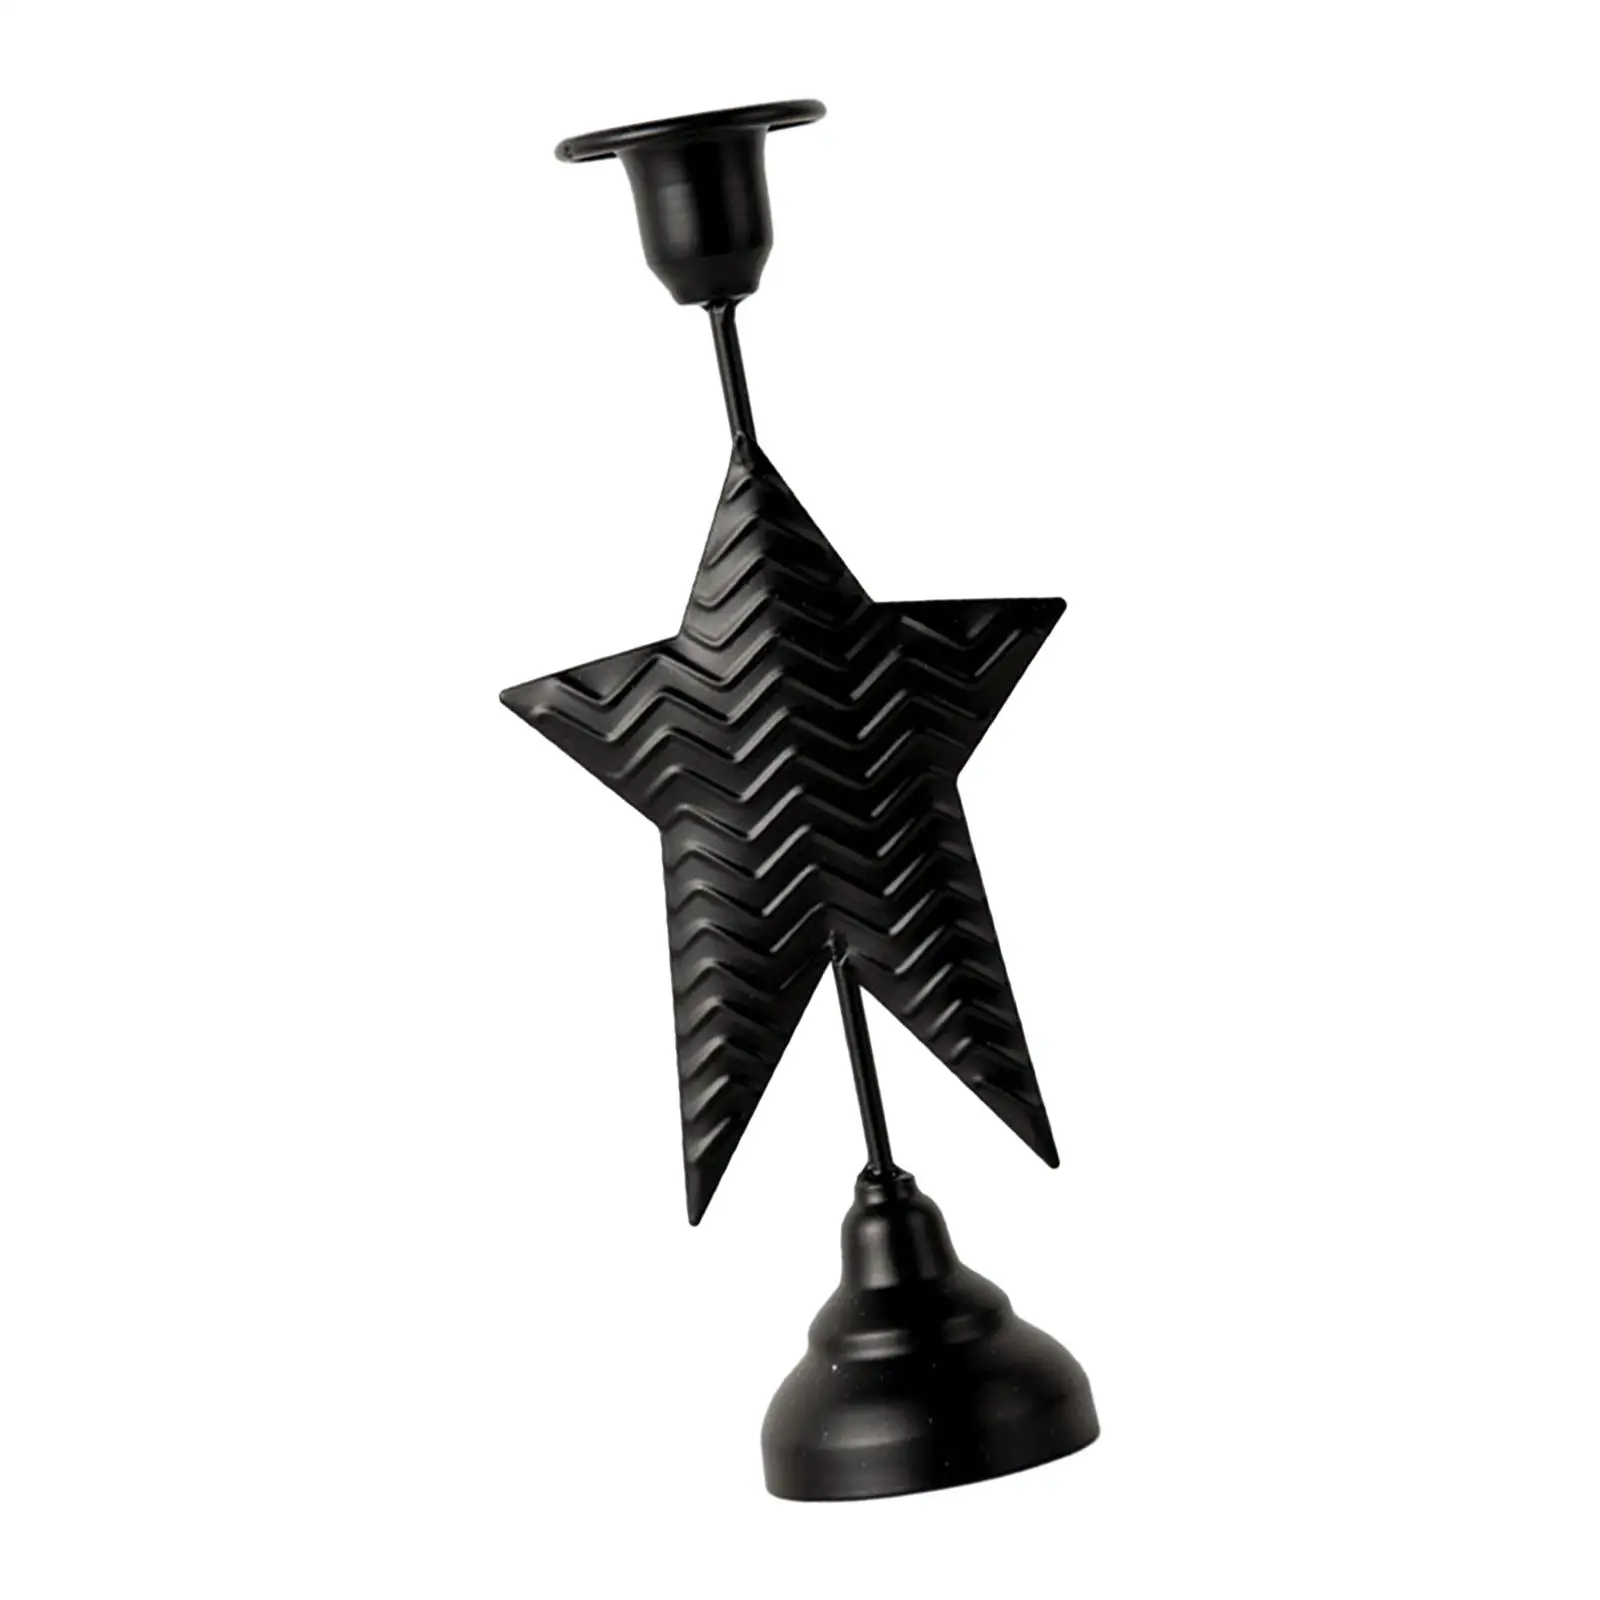 Black Iron Conical Candle Holder Centerpiece Table Decoration Bedroom Decorative